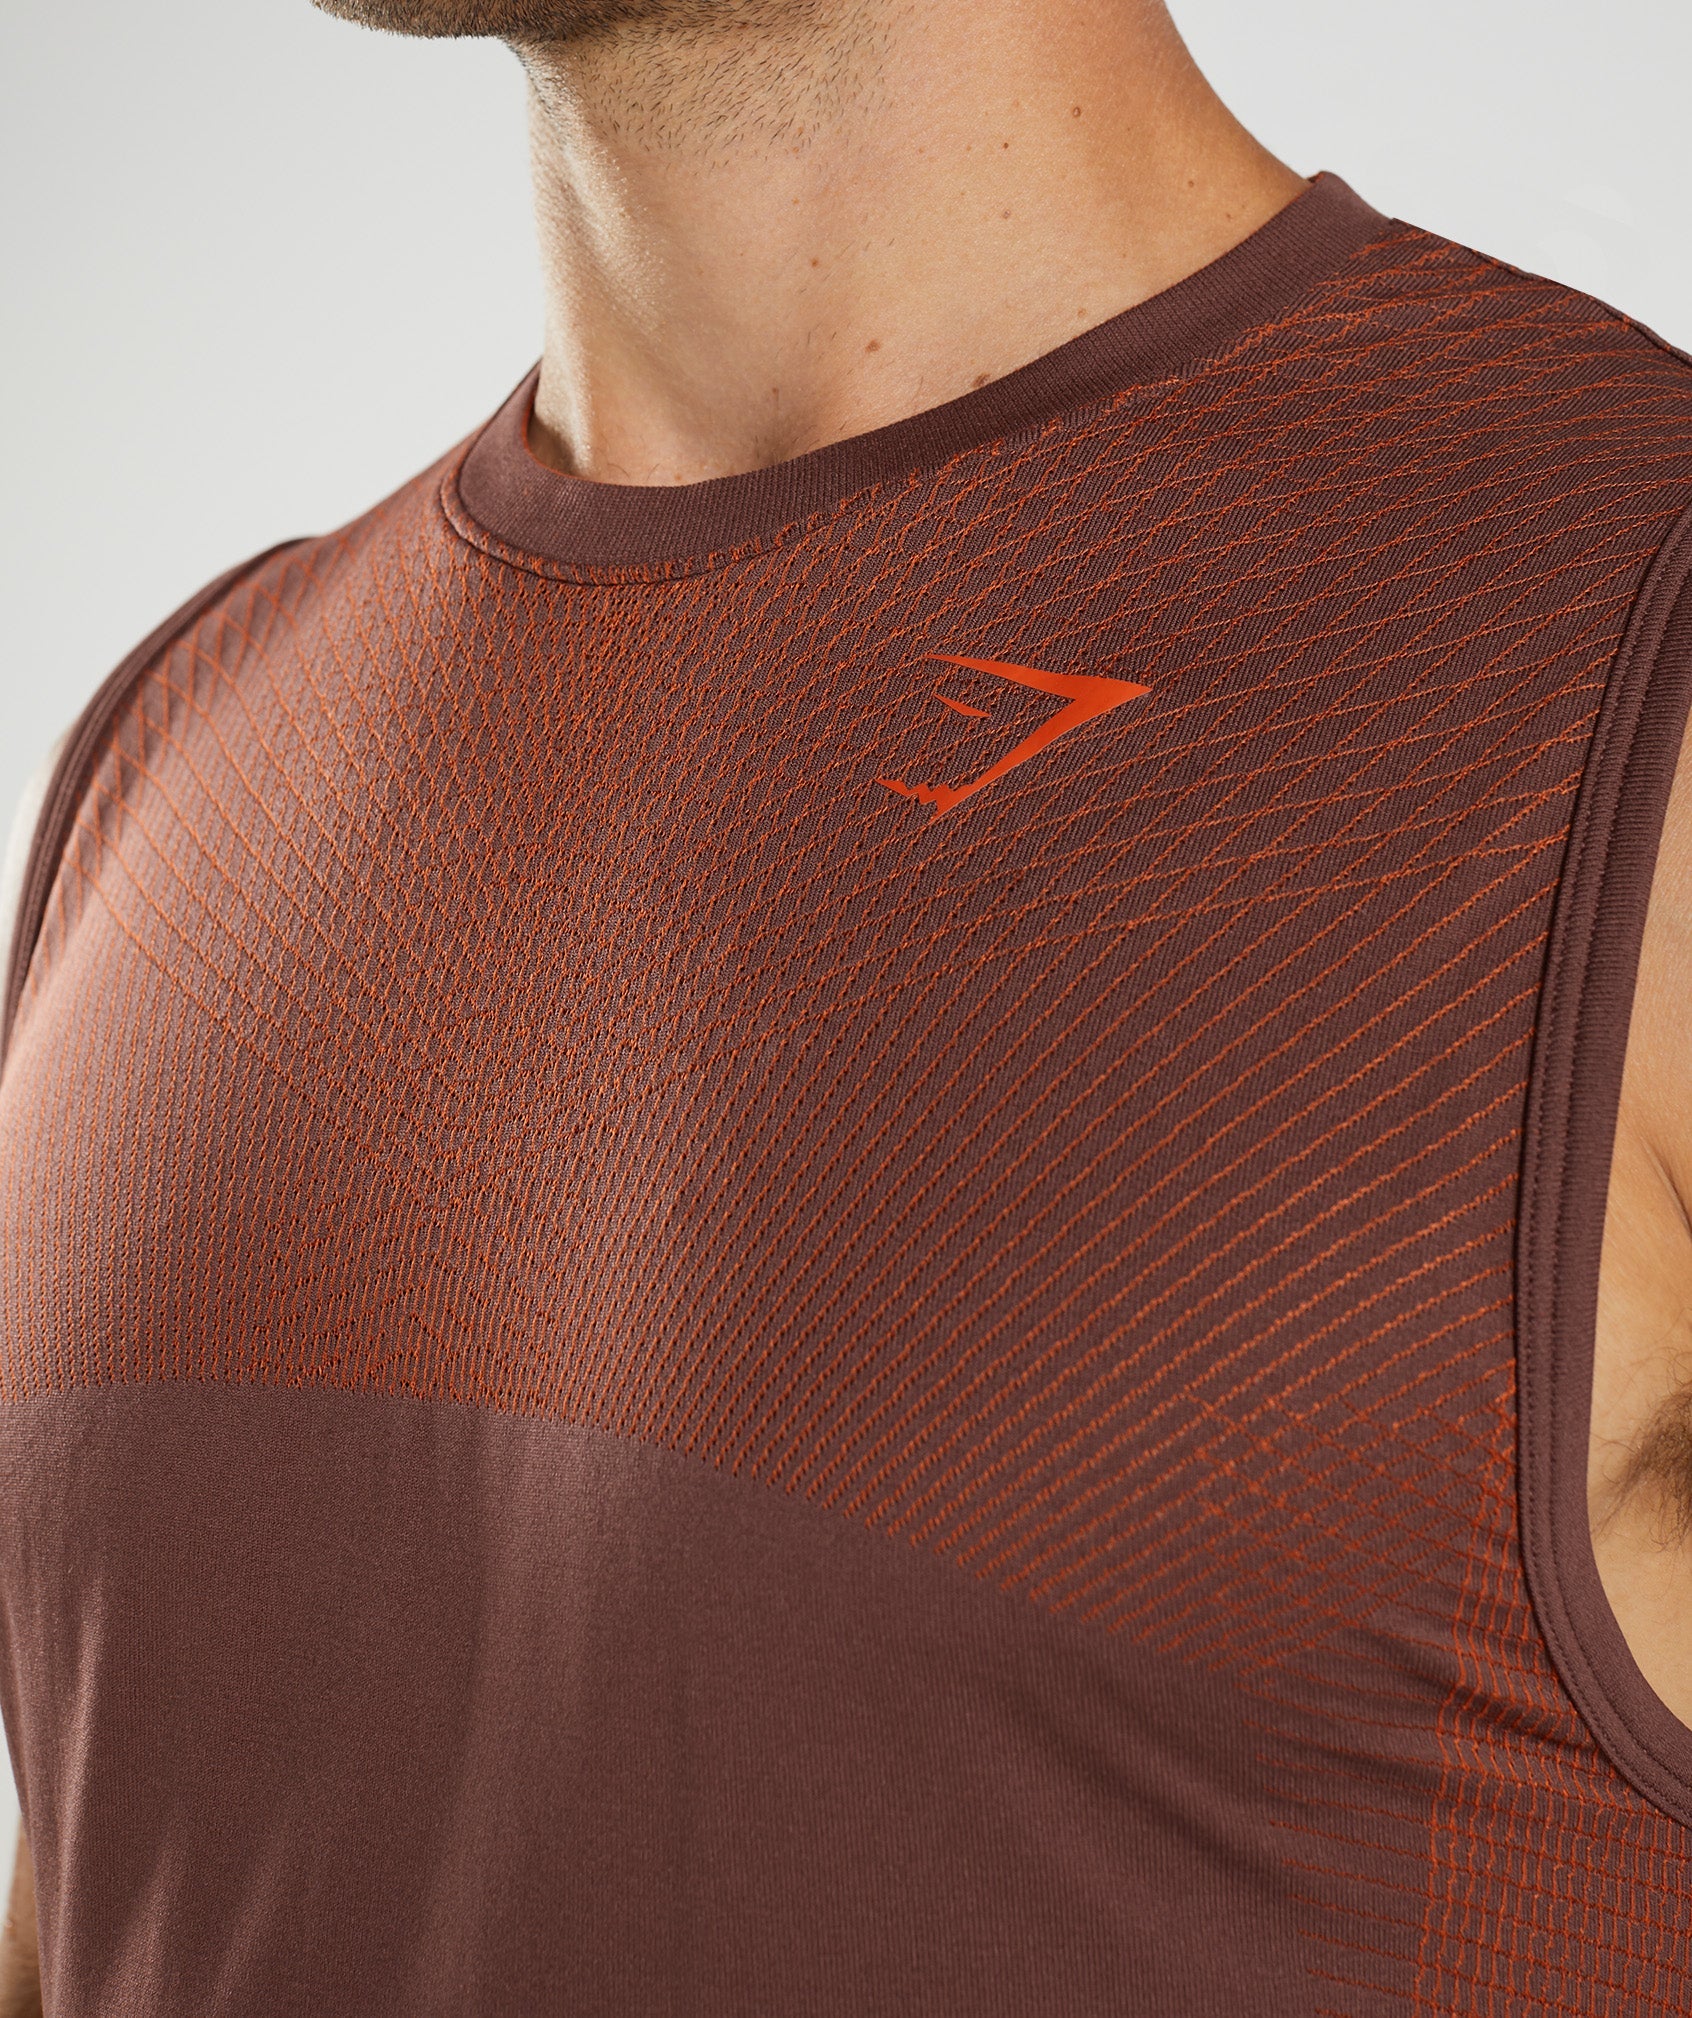 Apex Seamless Tank in Cherry Brown/Pepper Red - view 6